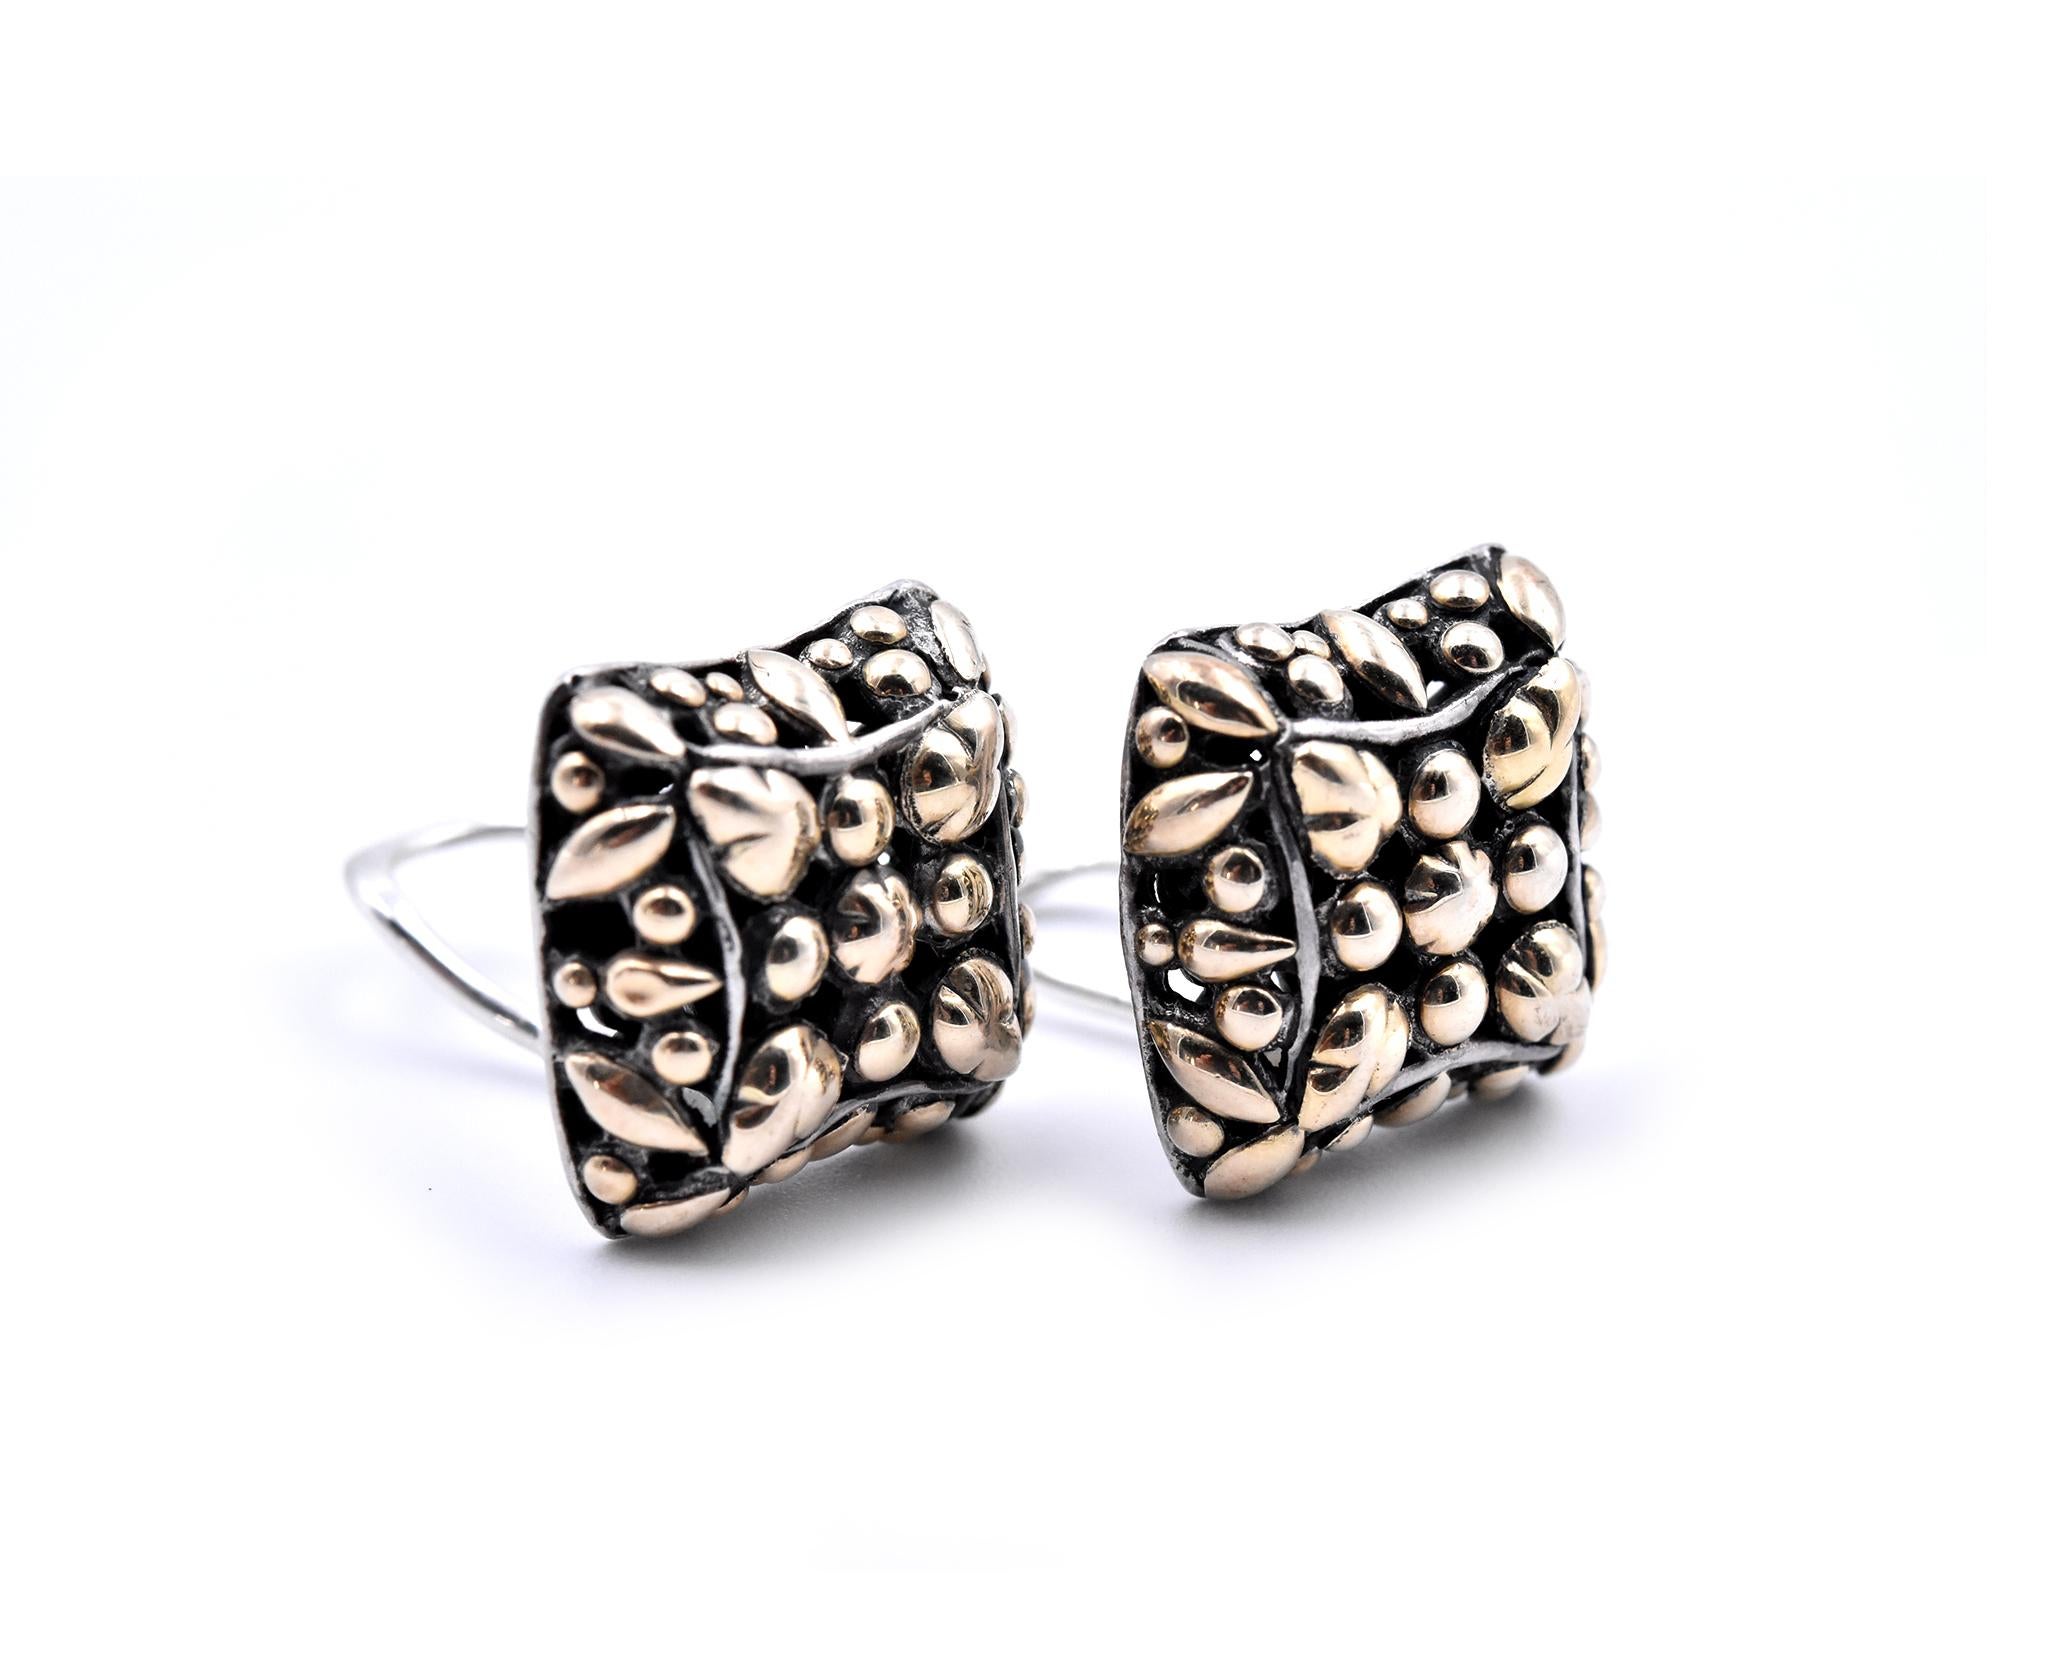 Designer: John Hardy
Material: sterling silver and 18k yellow gold
Dimensions: earrings are approximately 16.44mm by 16.04mm
Fastenings: clip-on with omega backs
Weight: 9.6 grams
Retail: $650
